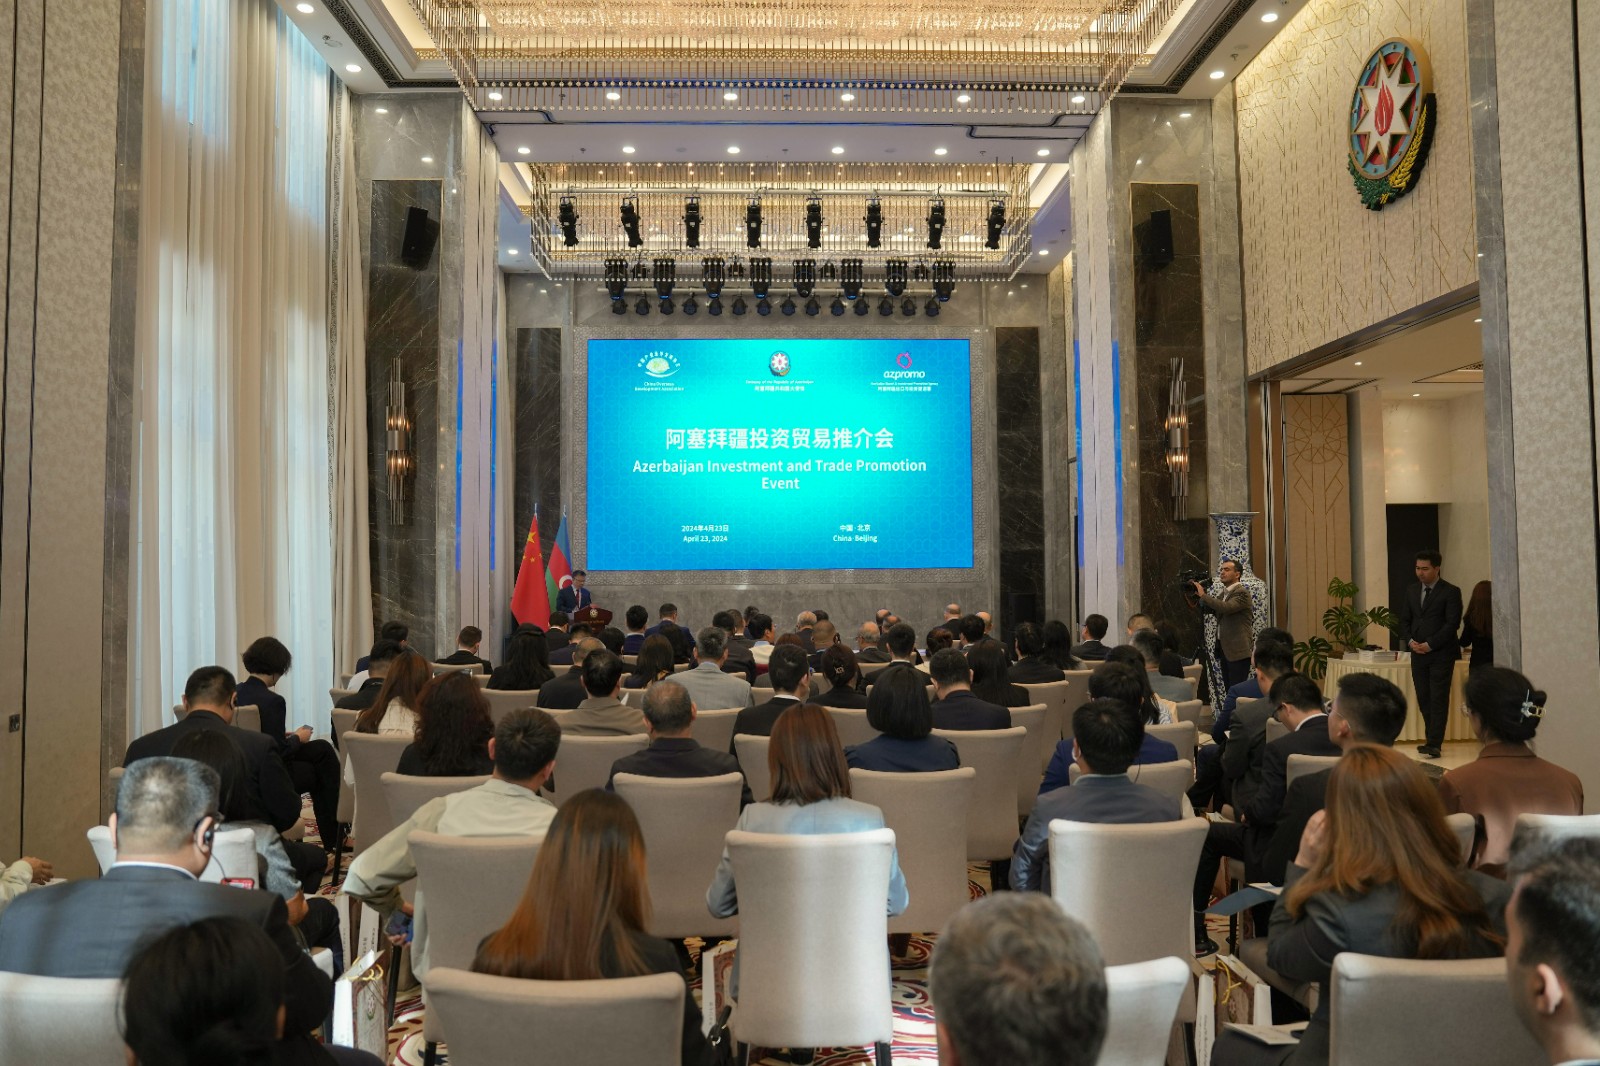 He Zhenwei and Jiang Yun were invited to attend the Azerbaijan Investment and Trade Promotion Conference